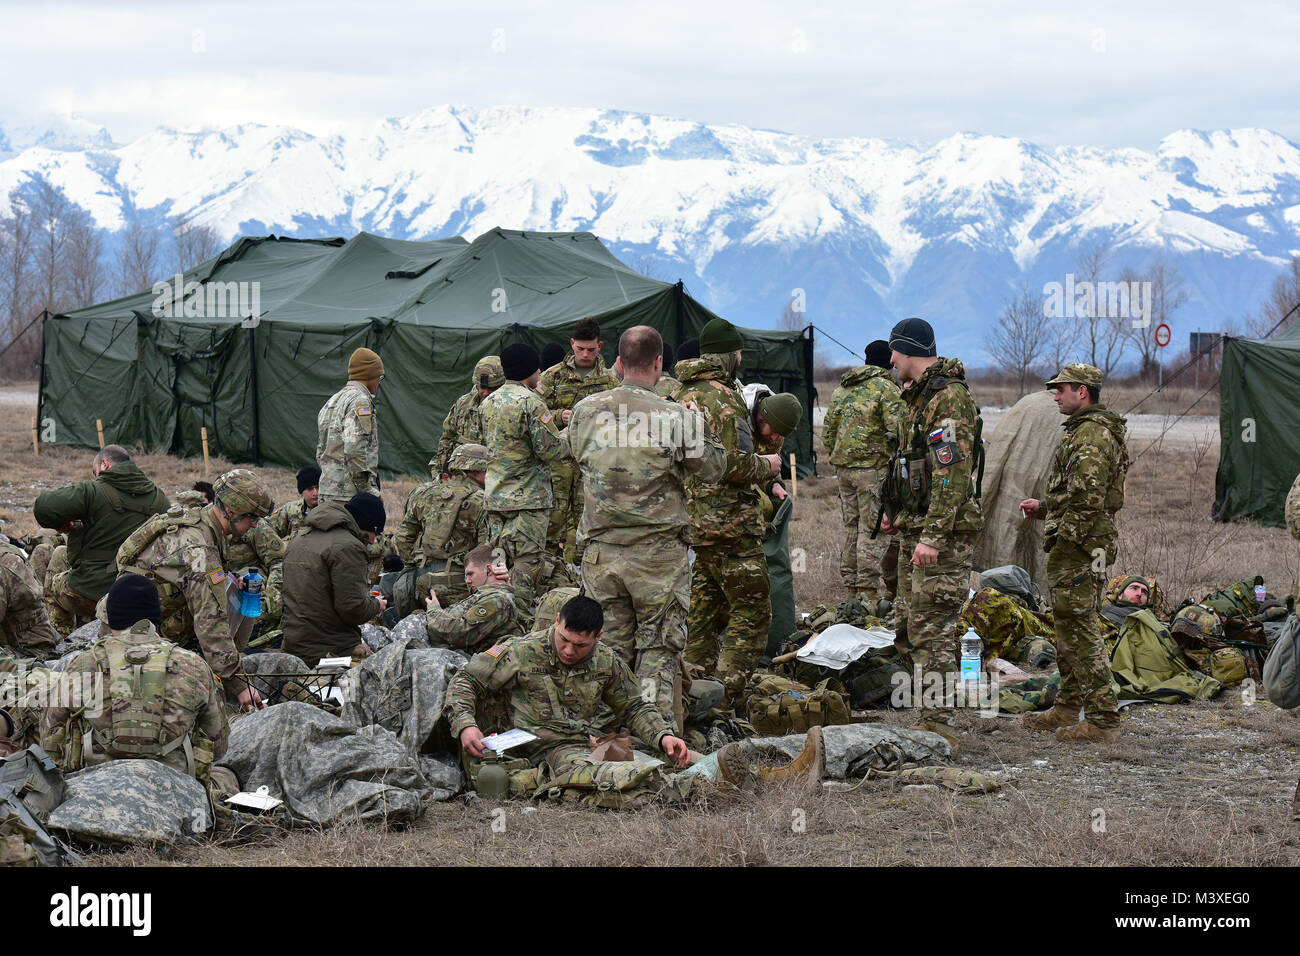 U.S. Army Paratroopers assigned to the 1st Battalion, 503rd Infantry Regiment, 173rd Airborne Brigade, Italian Army Paratroopers from Brigata Julia Paracadutisti Alpini and the Brigata Folgore and Slovenian Army Soldiers relax after a land navigation event during the weeklong testing for the Expert Infantryman Badge. The soldiers must complete a number of prerequisites and pass a battery of graded tests on basic Infantry skills, Feb. 6, 2018 at Cellina Meduna area, Pordenone, Italy. (U.S. Army Photo by Paolo Bovo) Stock Photo